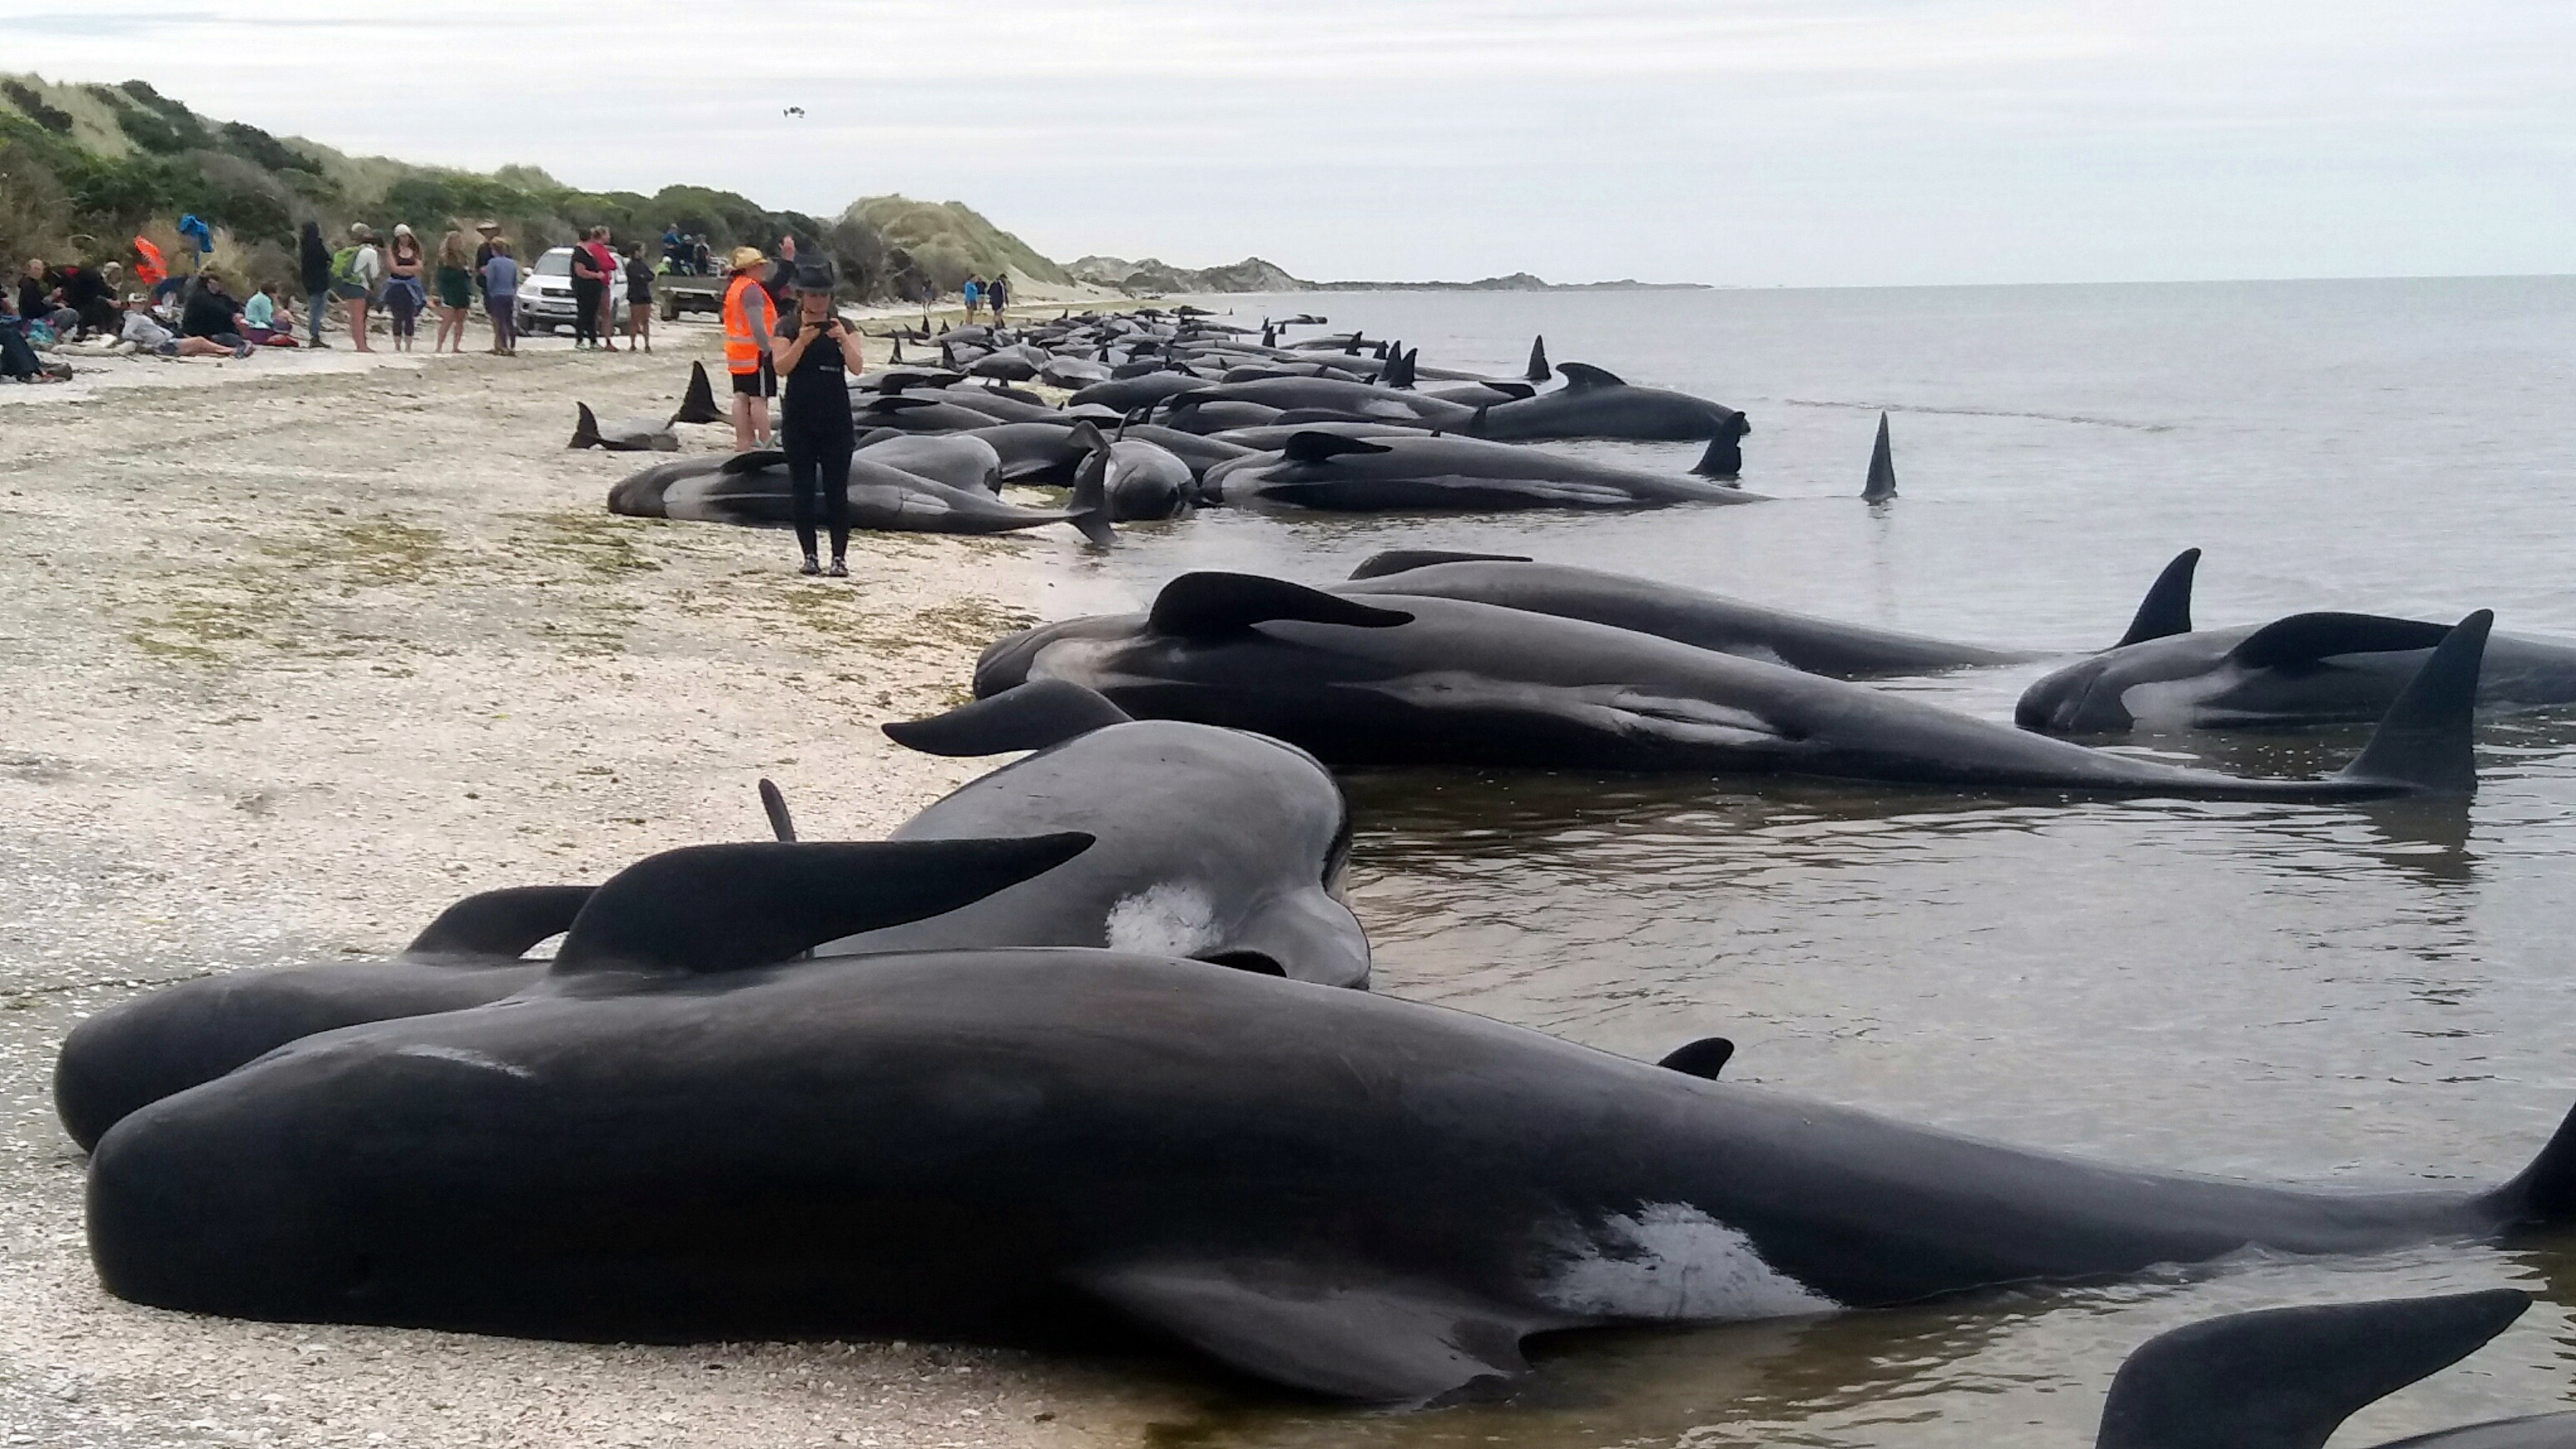 New Zealand volunteers formed a human chain in the water at a remote beach on Friday as they tried to save about 100 whales after more than 400 of the creatures beached themselves in one of the worst whale strandings in the nation's history. About three-quarters of the pilot whales were already dead when they were found Friday morning at Farewell Spit at the tip of the South Island. (Tim Cuff/New Zealand Herald via AP)